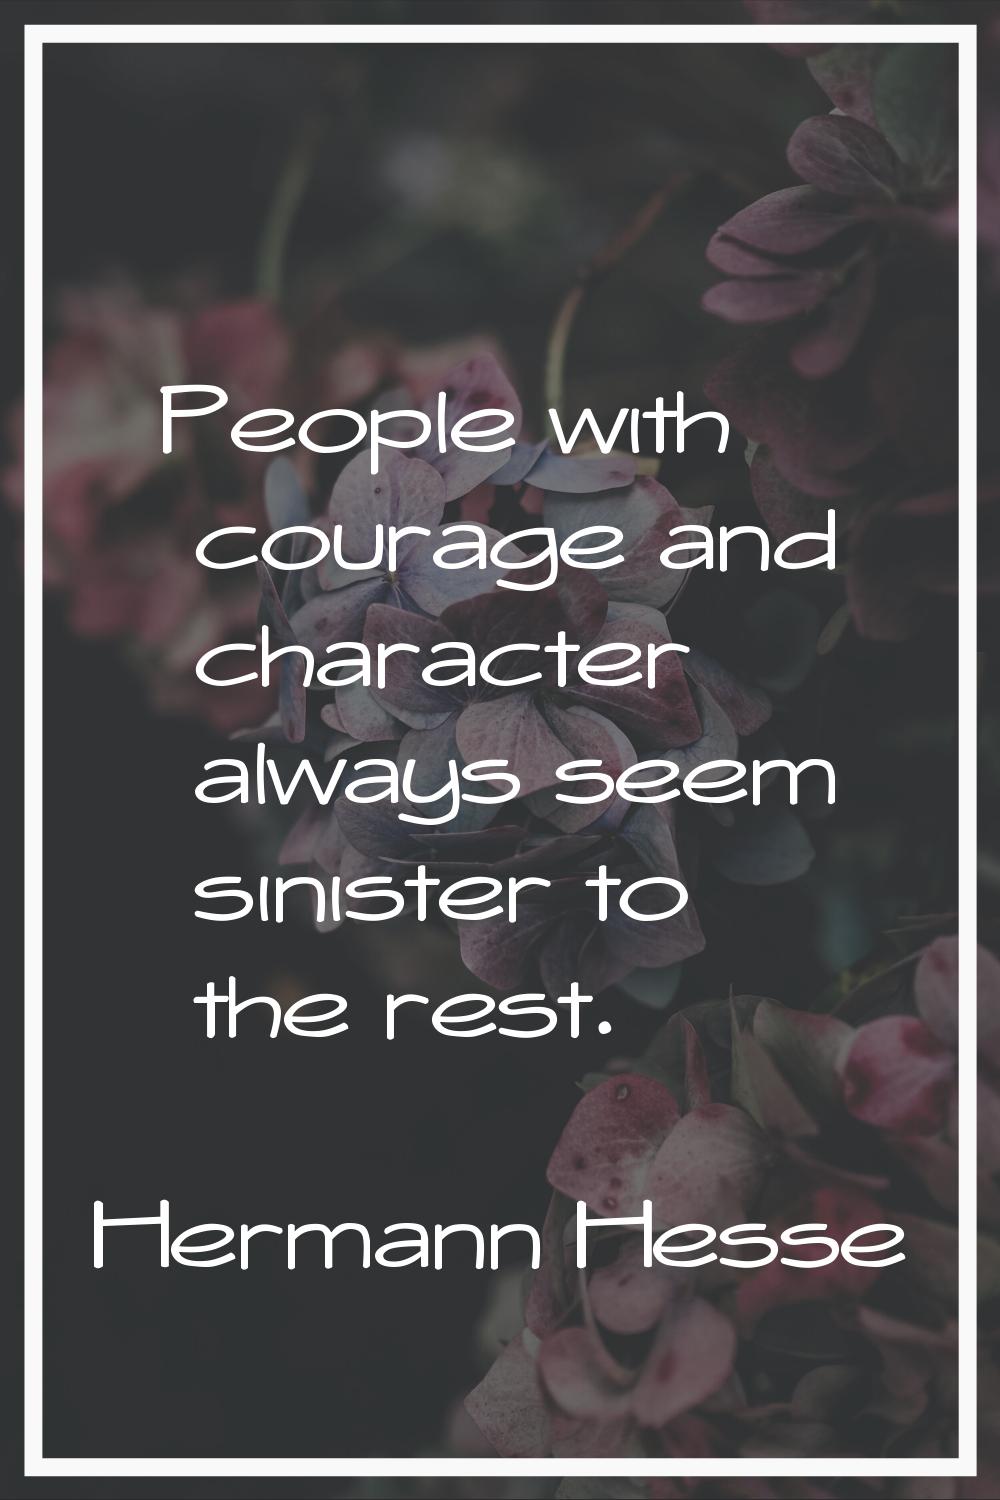 People with courage and character always seem sinister to the rest.